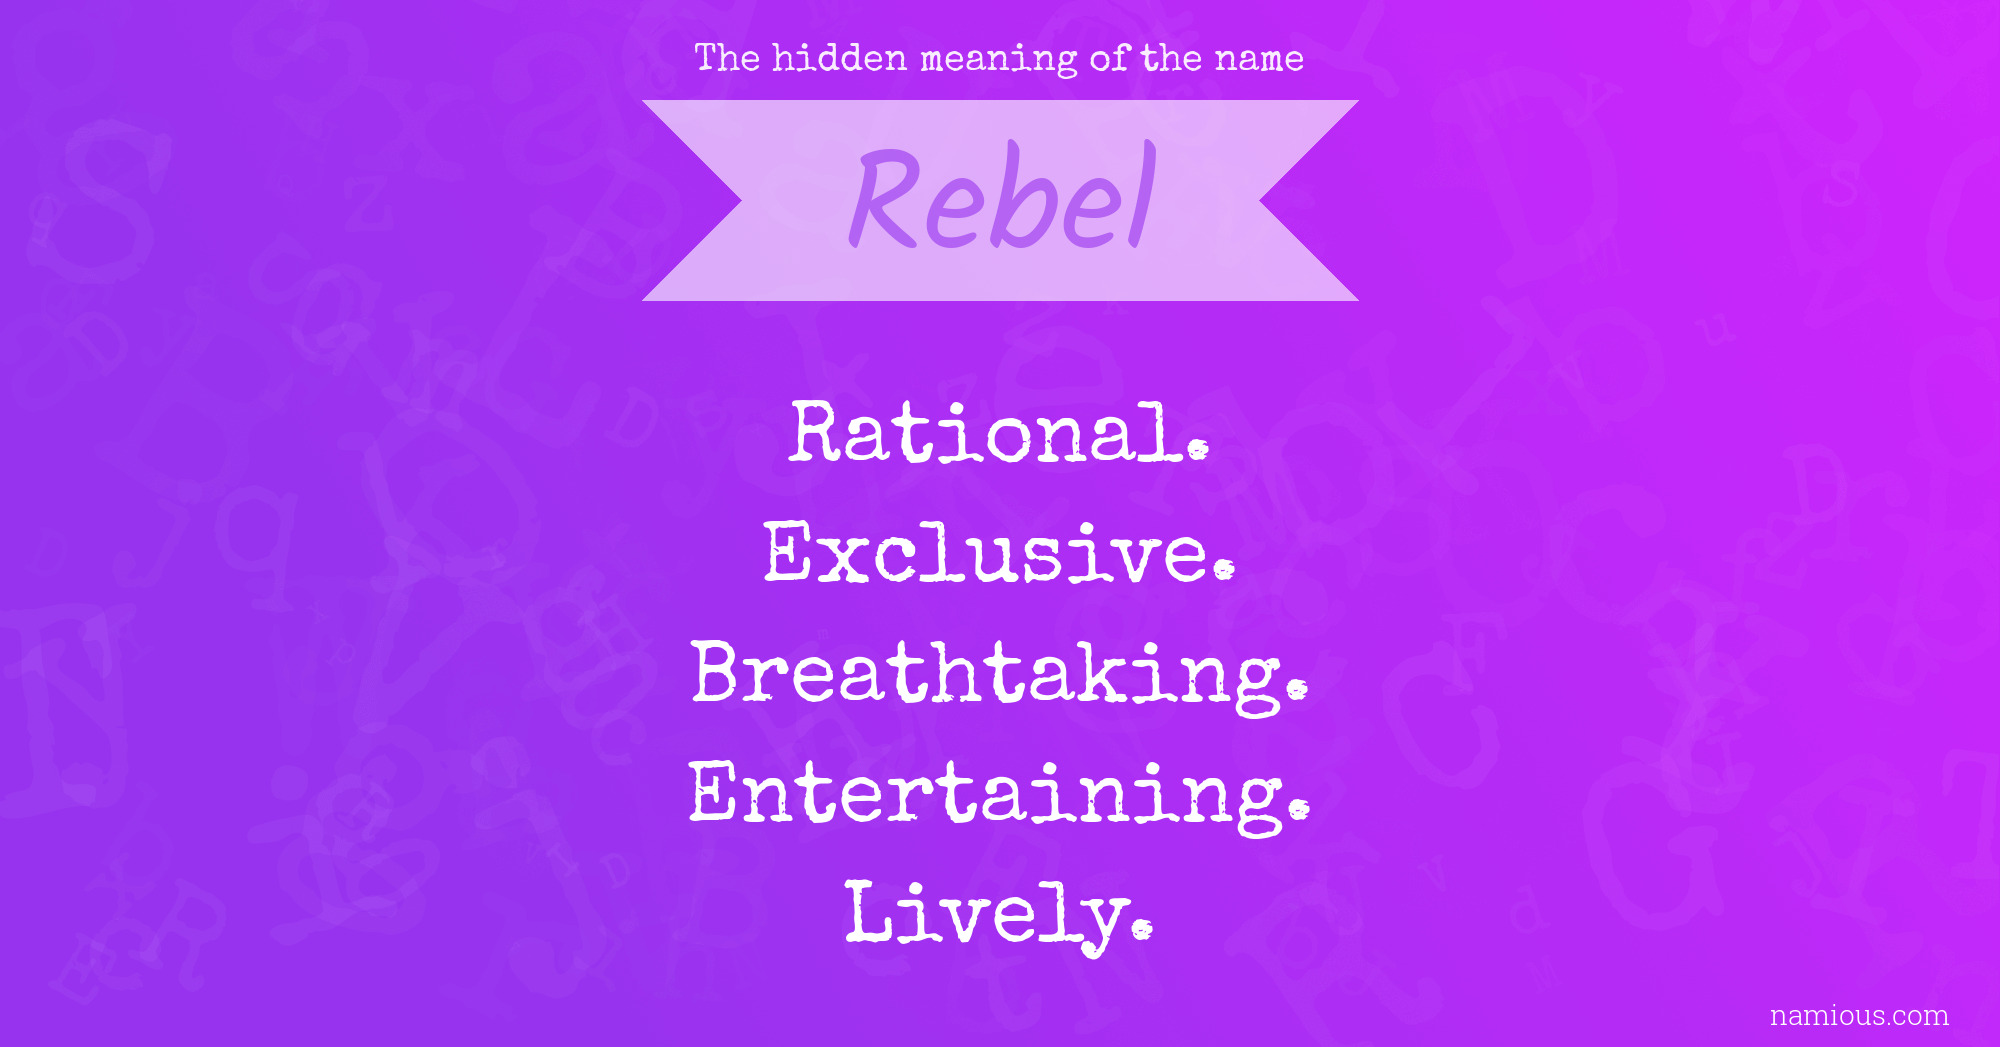 The hidden meaning of the name Rebel